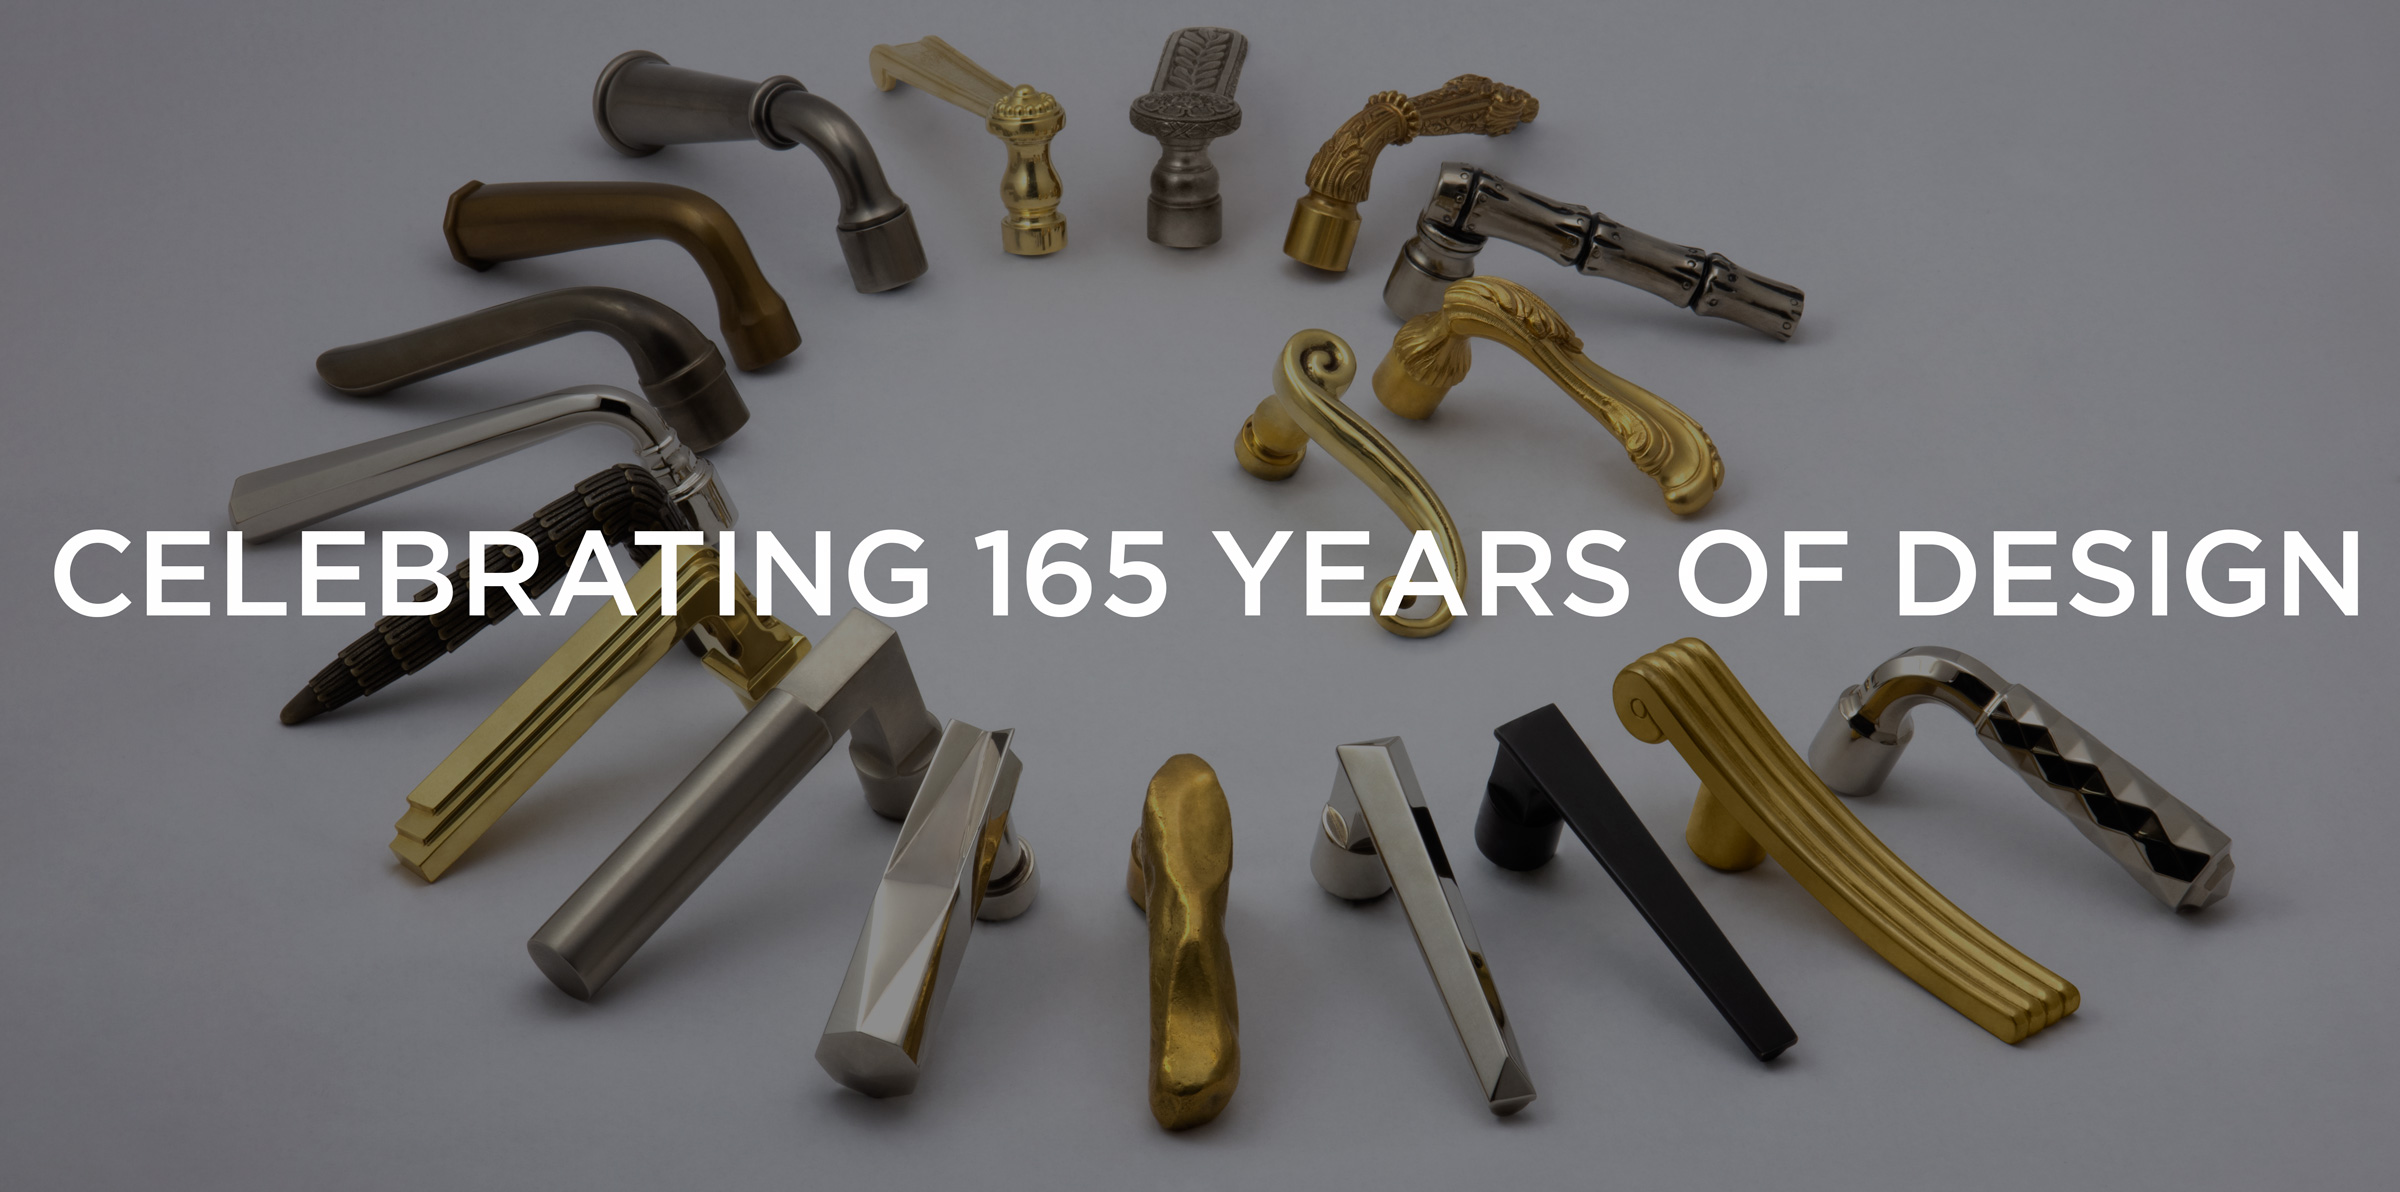 image reading 'Celebrating 165 Years of Design' with spiral of door levers in chronological order from Gothic through Modern